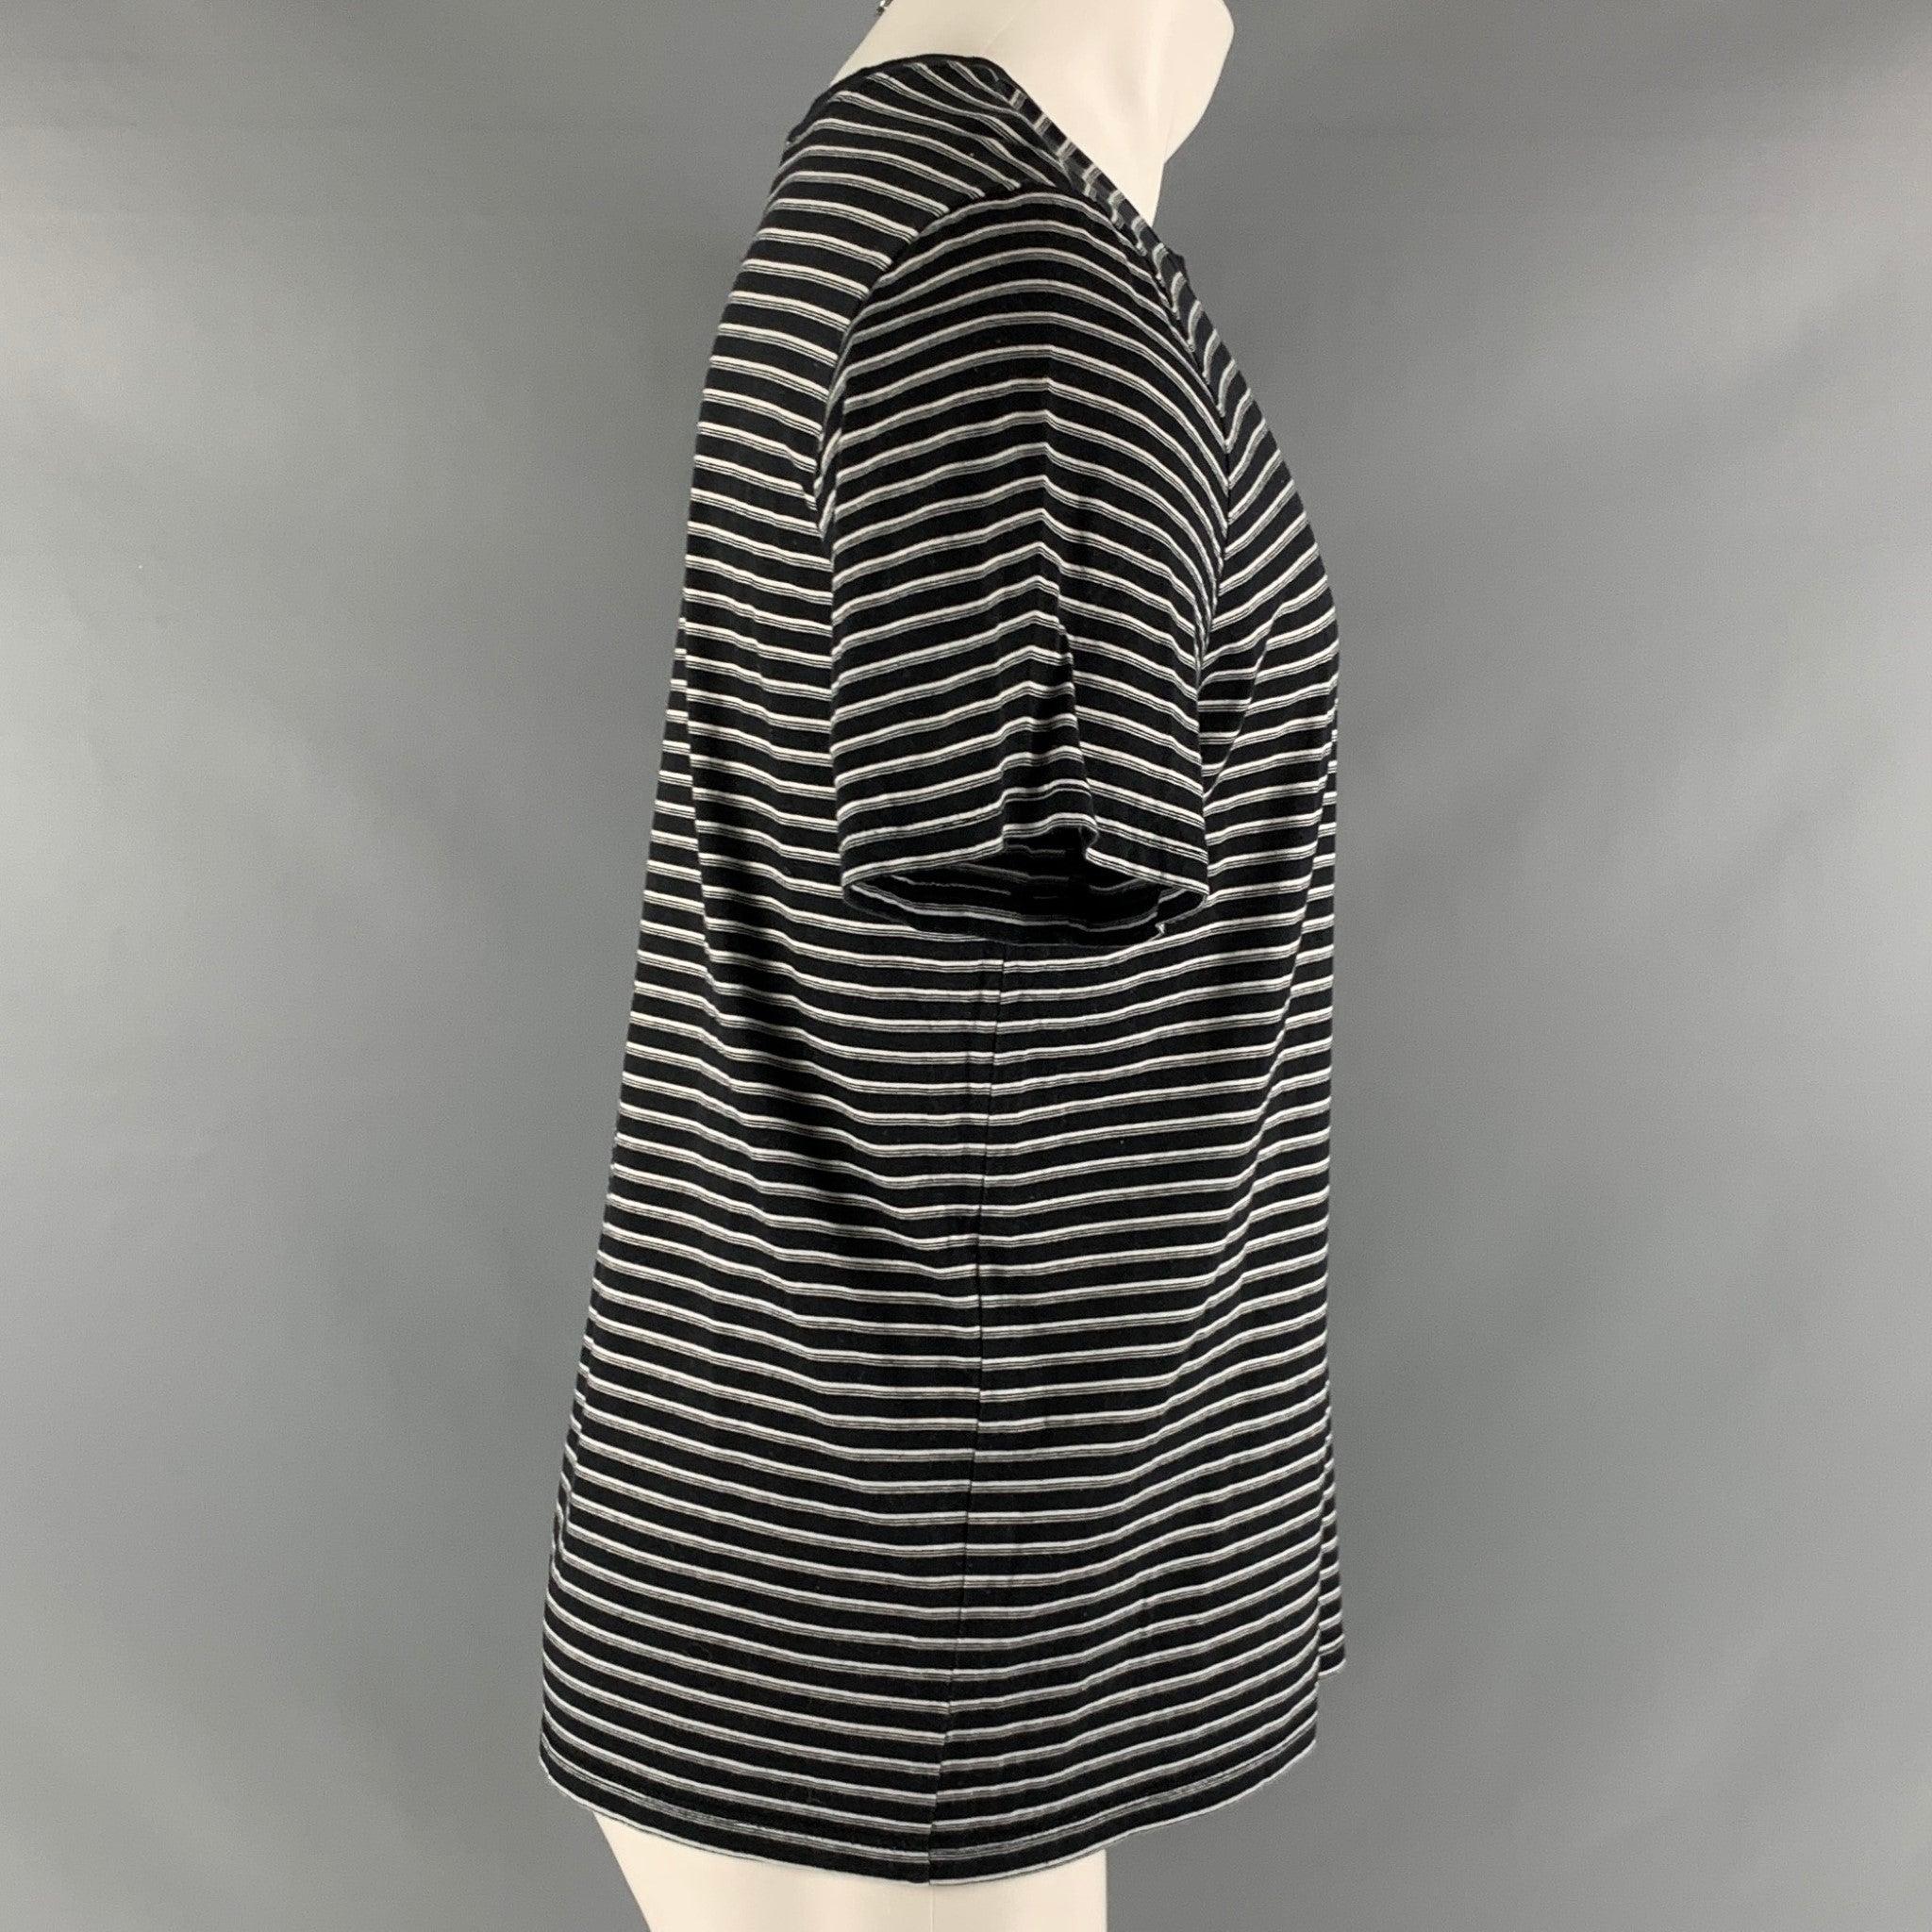 A.P.C. T-shirt comes in black and white cotton jersey knit and features a crew- neck.Very Good Pre-Owned Condition. Minor signs of wear. 

Marked:   M 

Measurements: 
 
Shoulder: 18 inches Chest: 38 inches Sleeve: 8 inches Length: 25 inches  
  
 